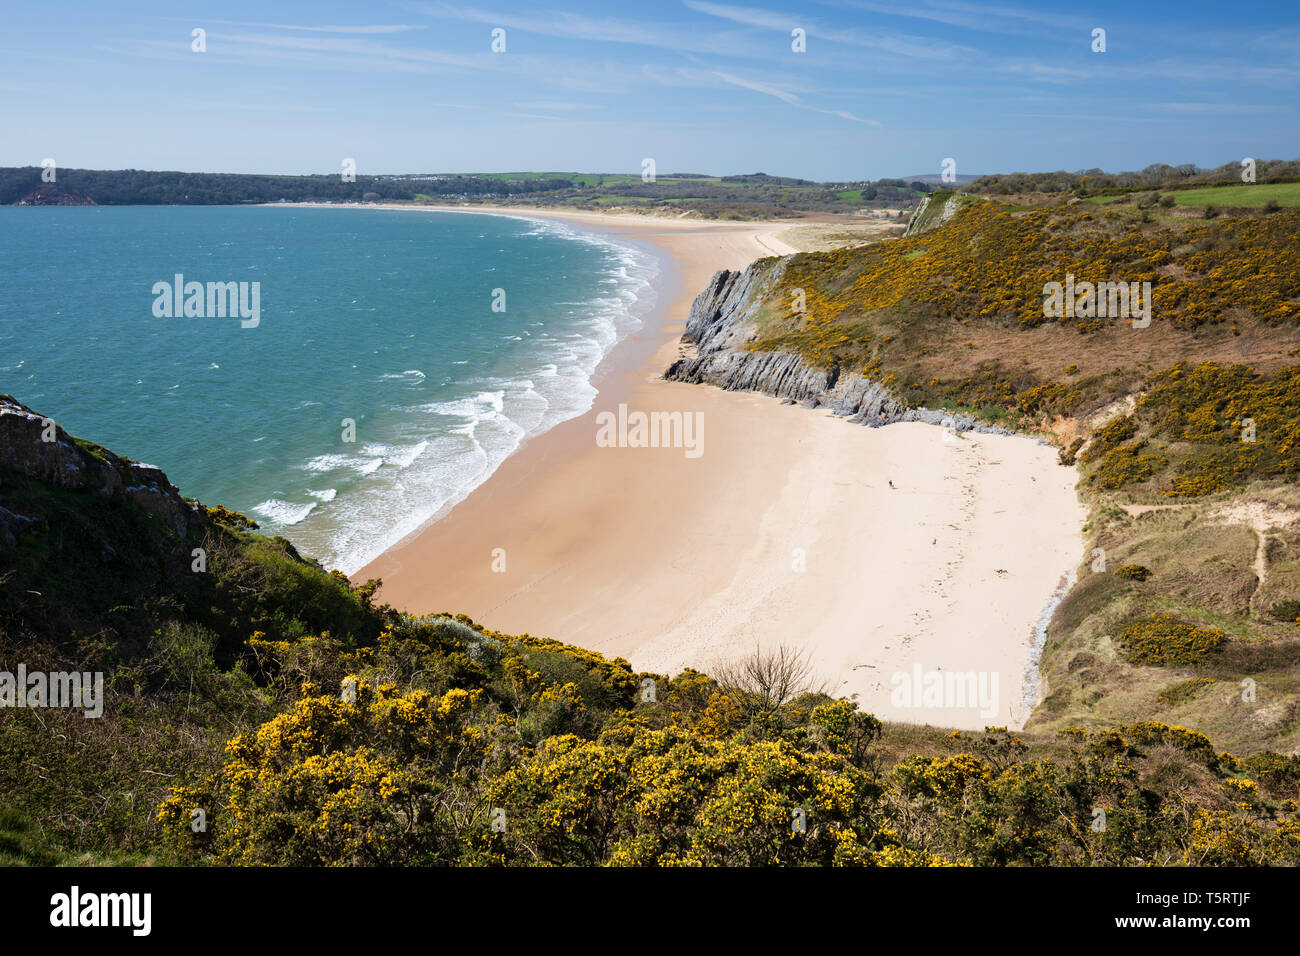 View over Tor Bay and Oxwich Bay beaches from the Great Tor, Gower Peninsula, Swansea, West Glamorgan, Wales, United Kingdom, Europe Stock Photo